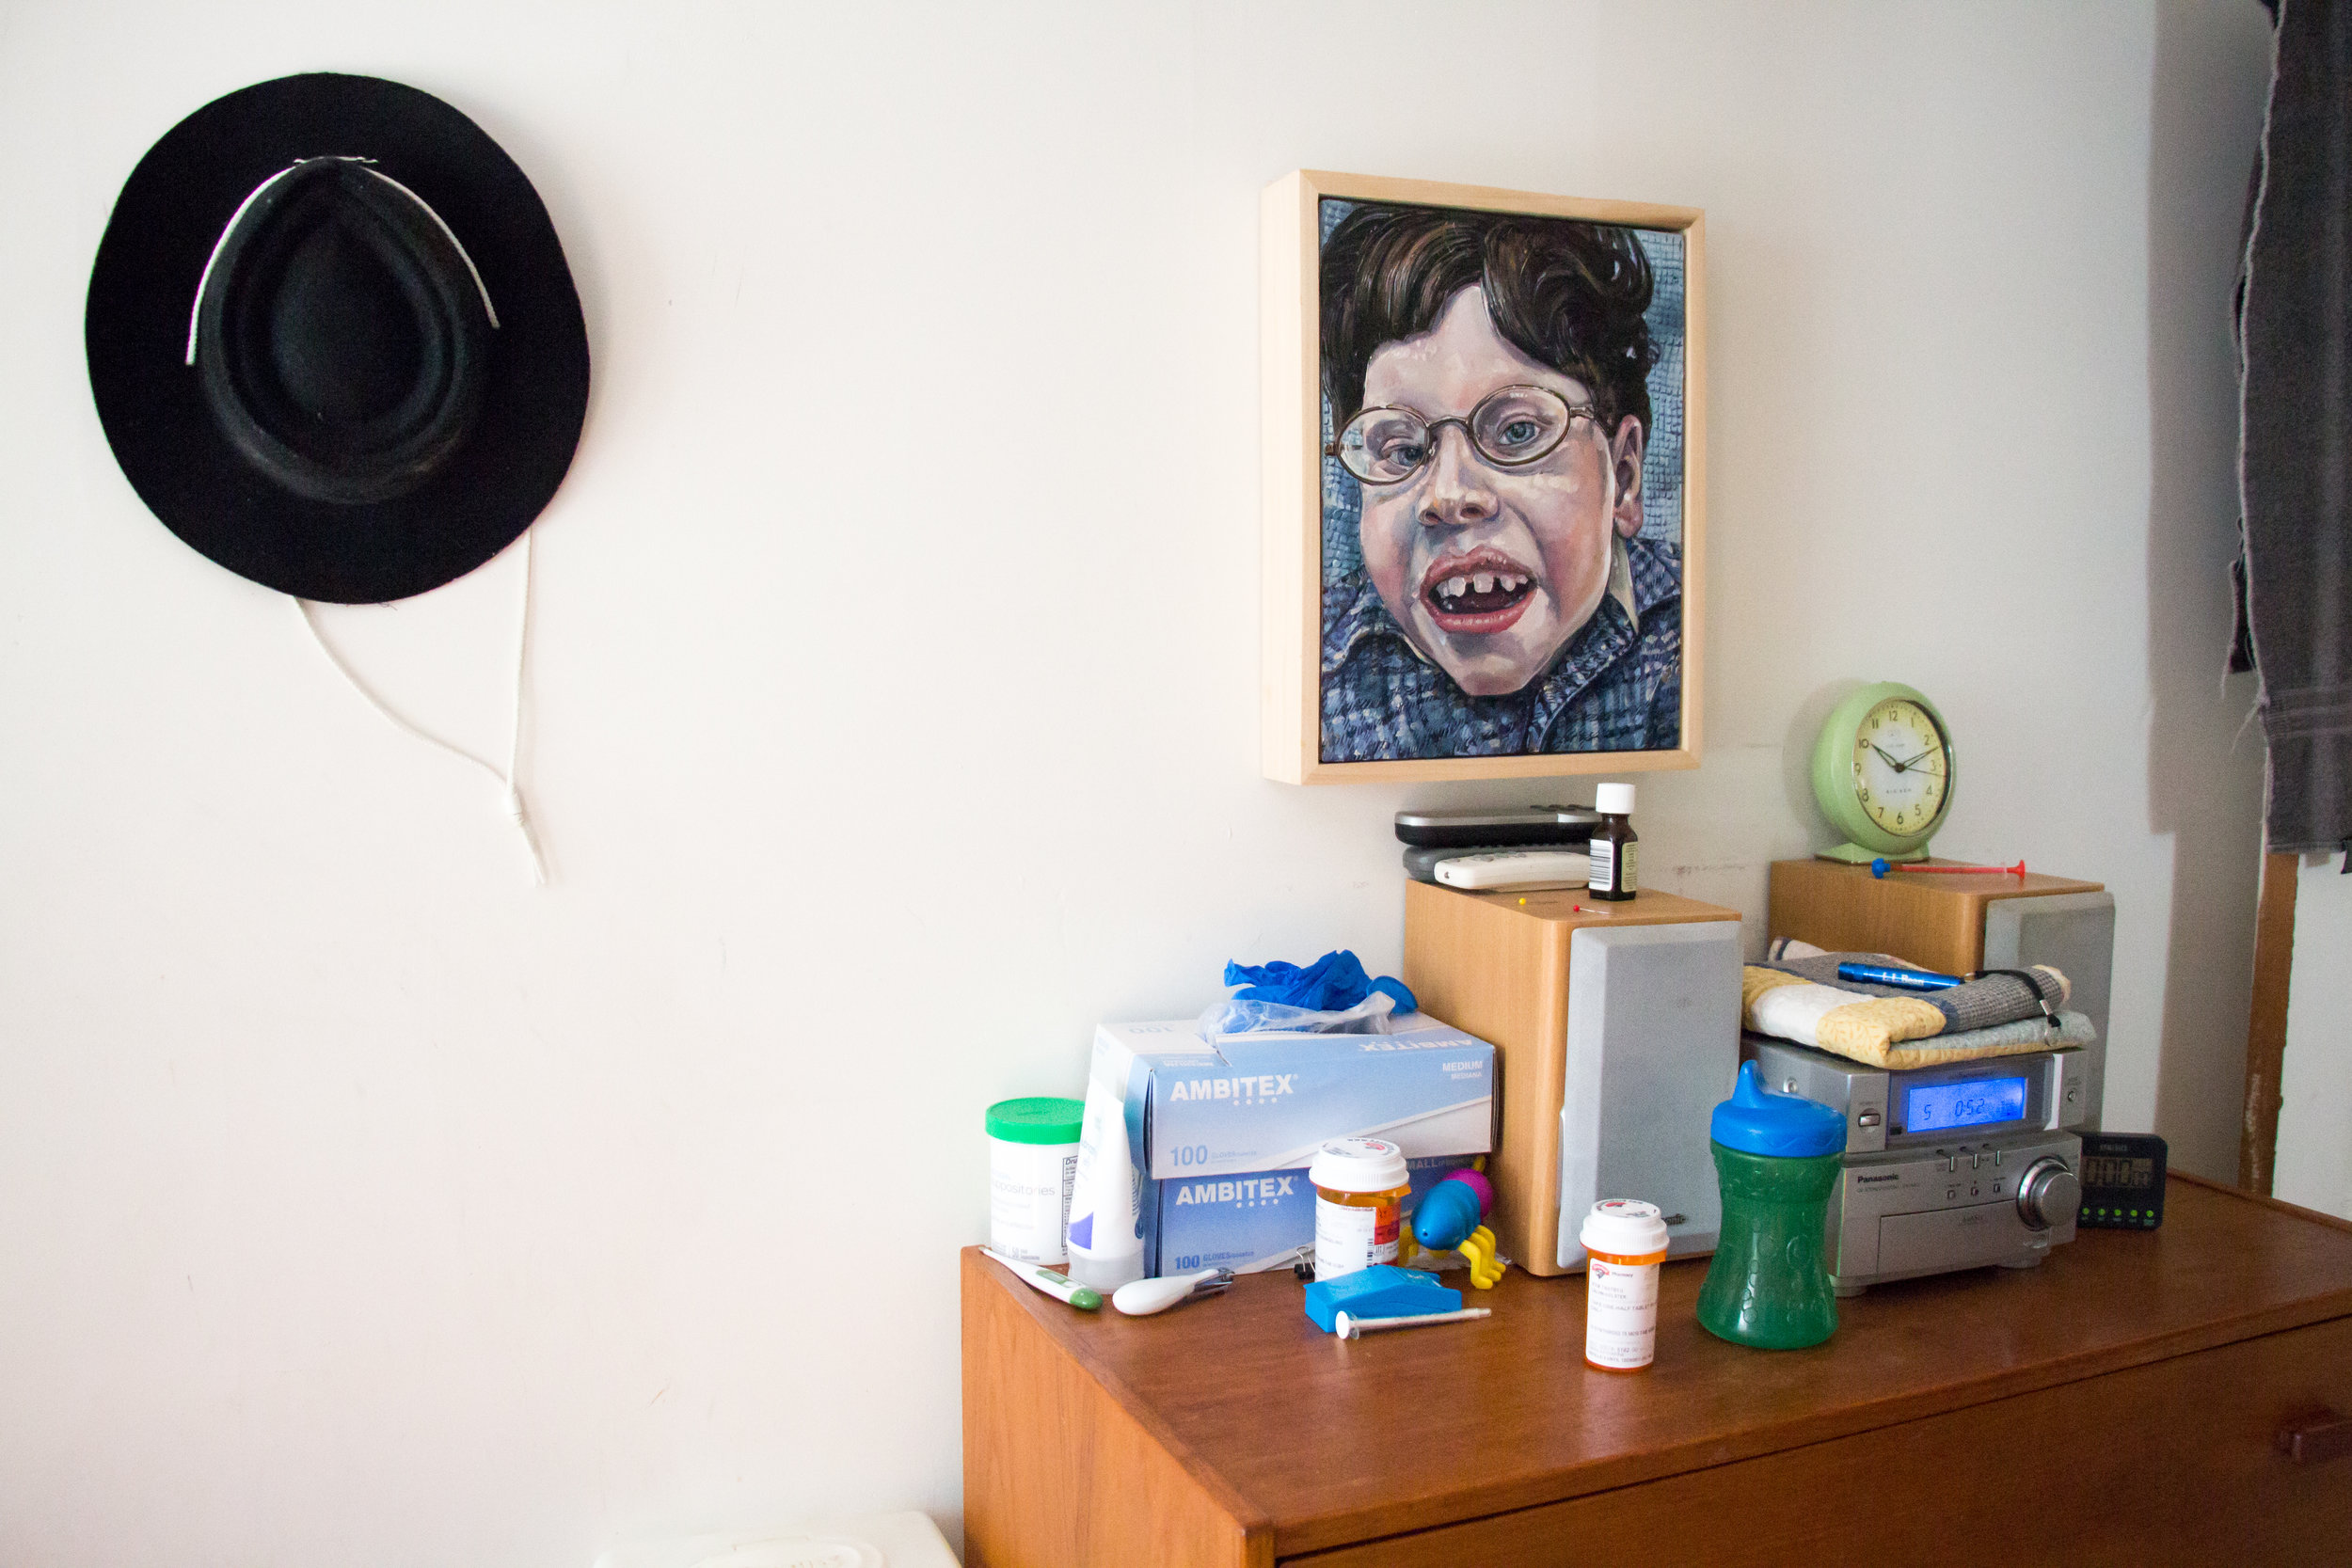  A portrait of Calvin hangs above a dresser covered with medications and medical supplies in his bedroom on September 30, 2017 in Brunswick, Maine. Calvin doesn't sleep very well and wakes up several times a night. Christy gets up to soothe him, cove